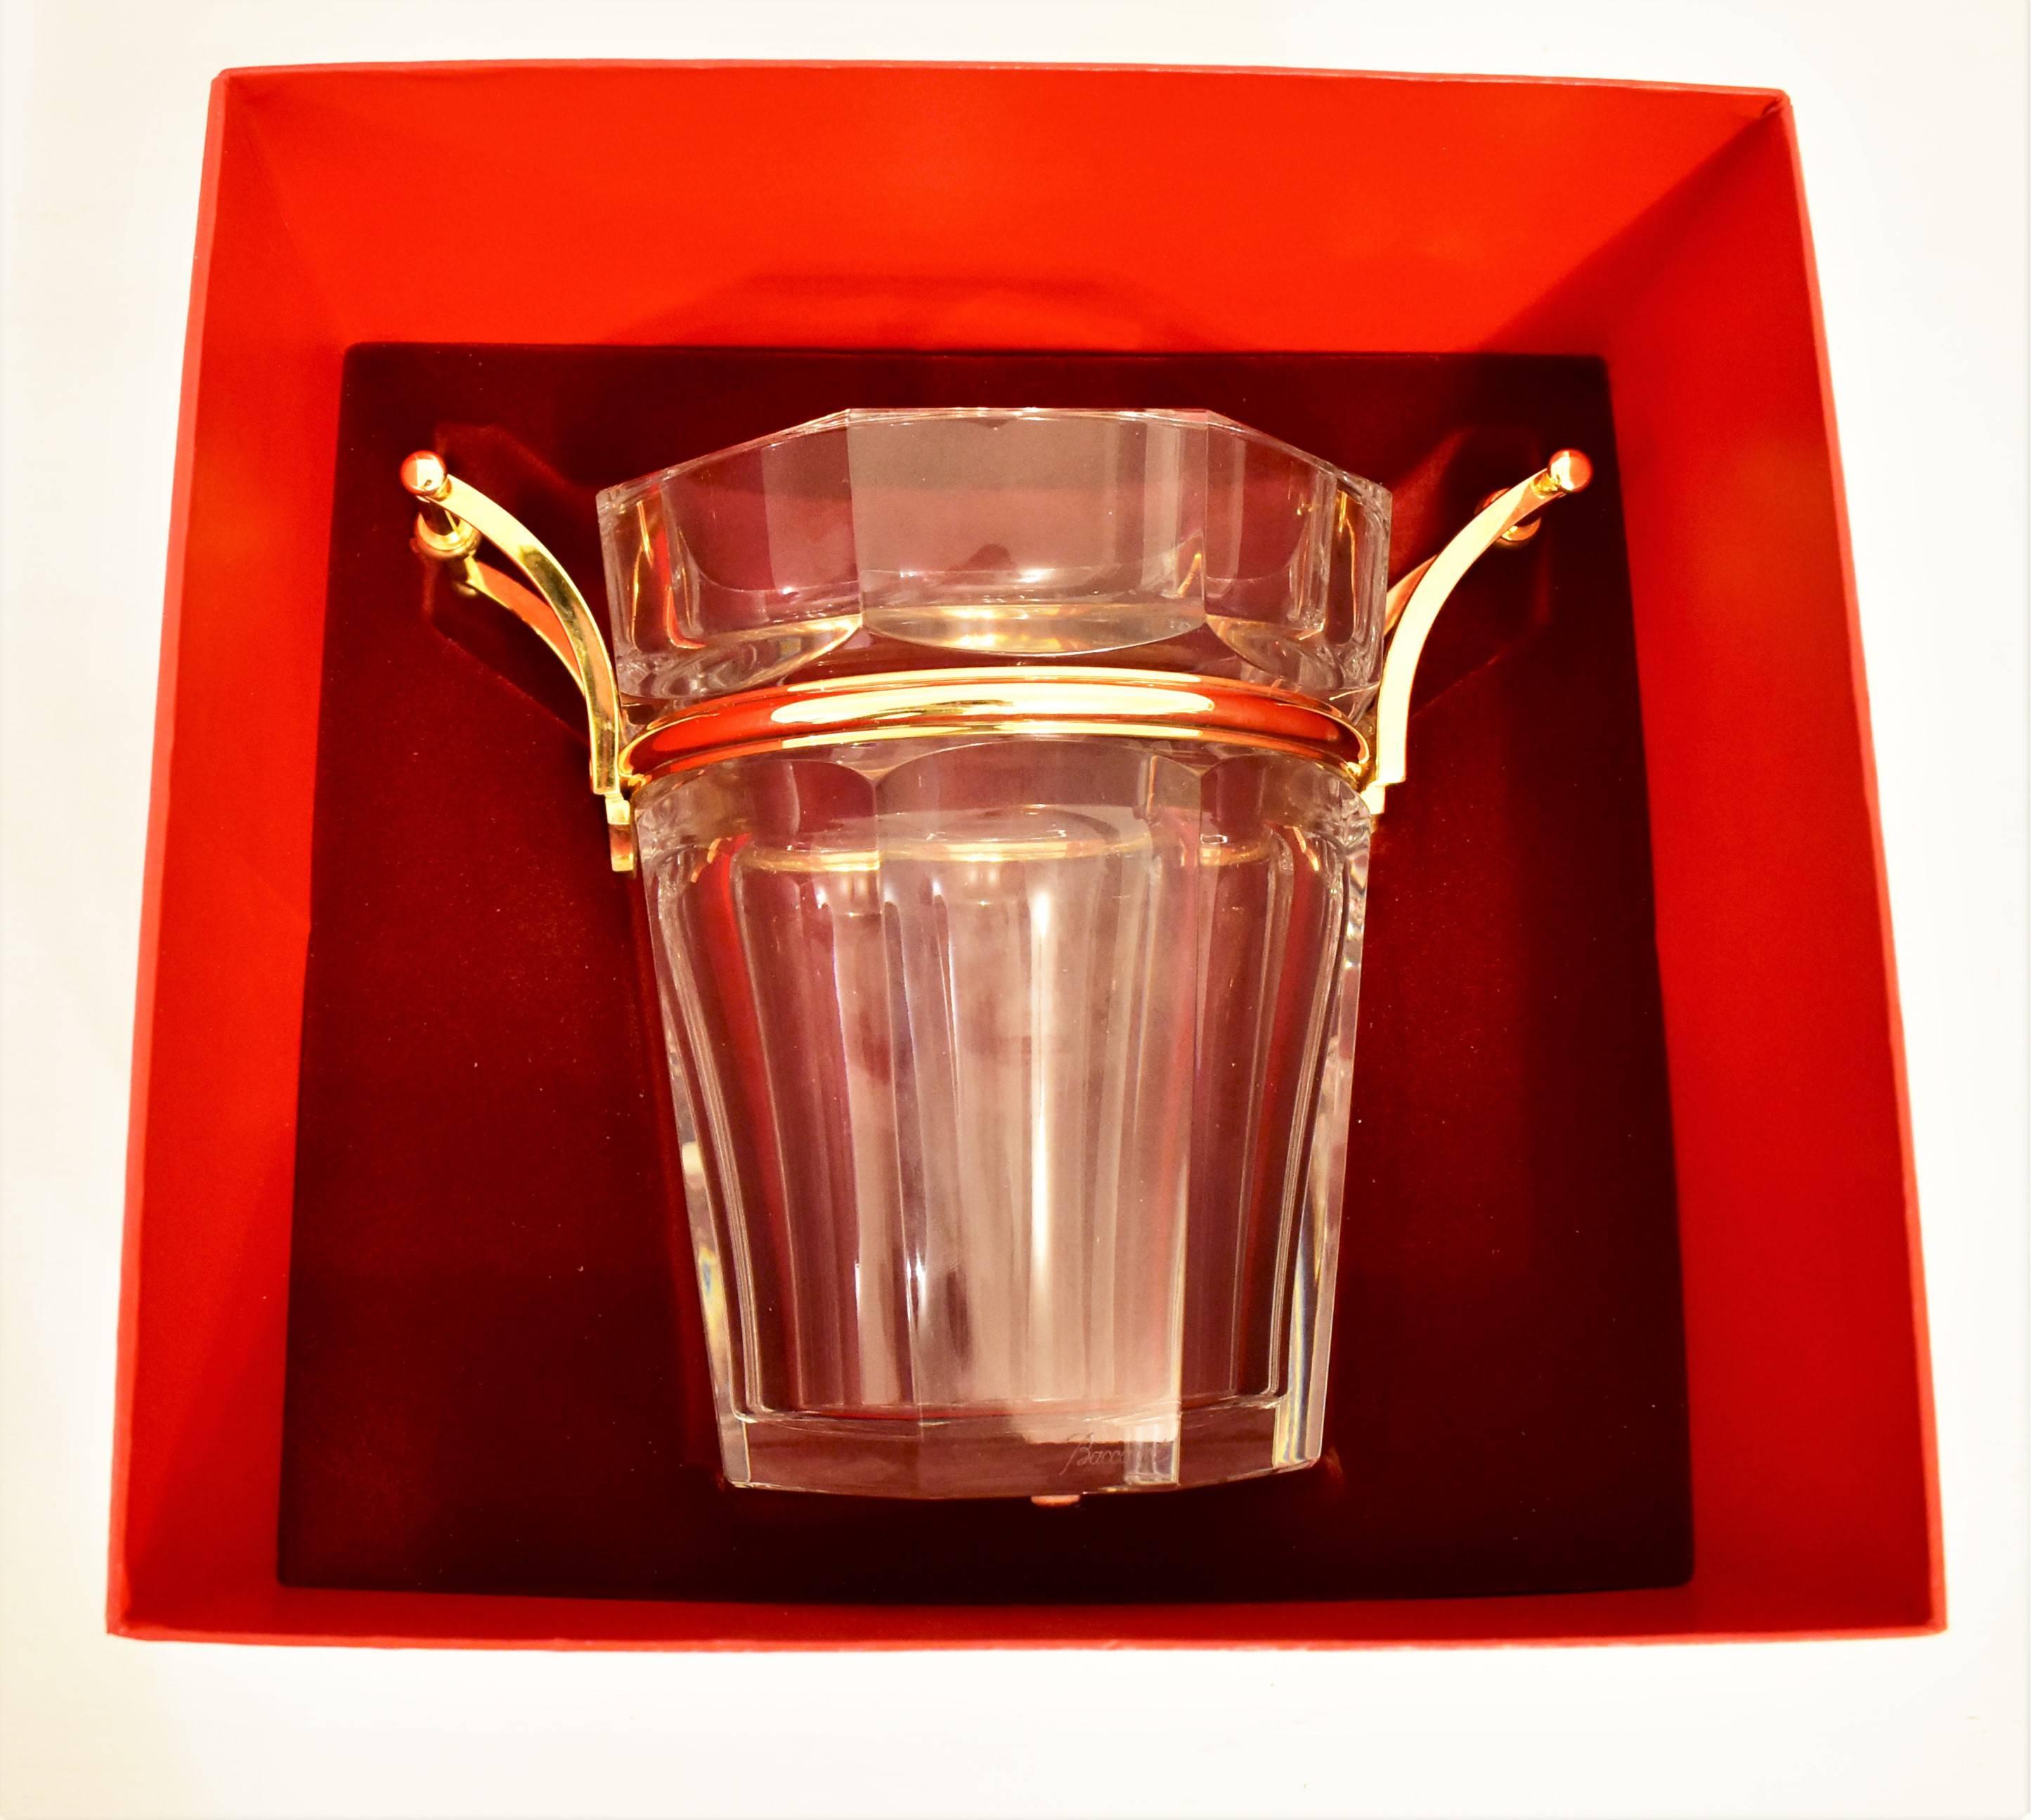 Baccarat Cut Crystal Modern Harcourt Champagne Cooler, Gilded Handles In Good Condition For Sale In London, GB